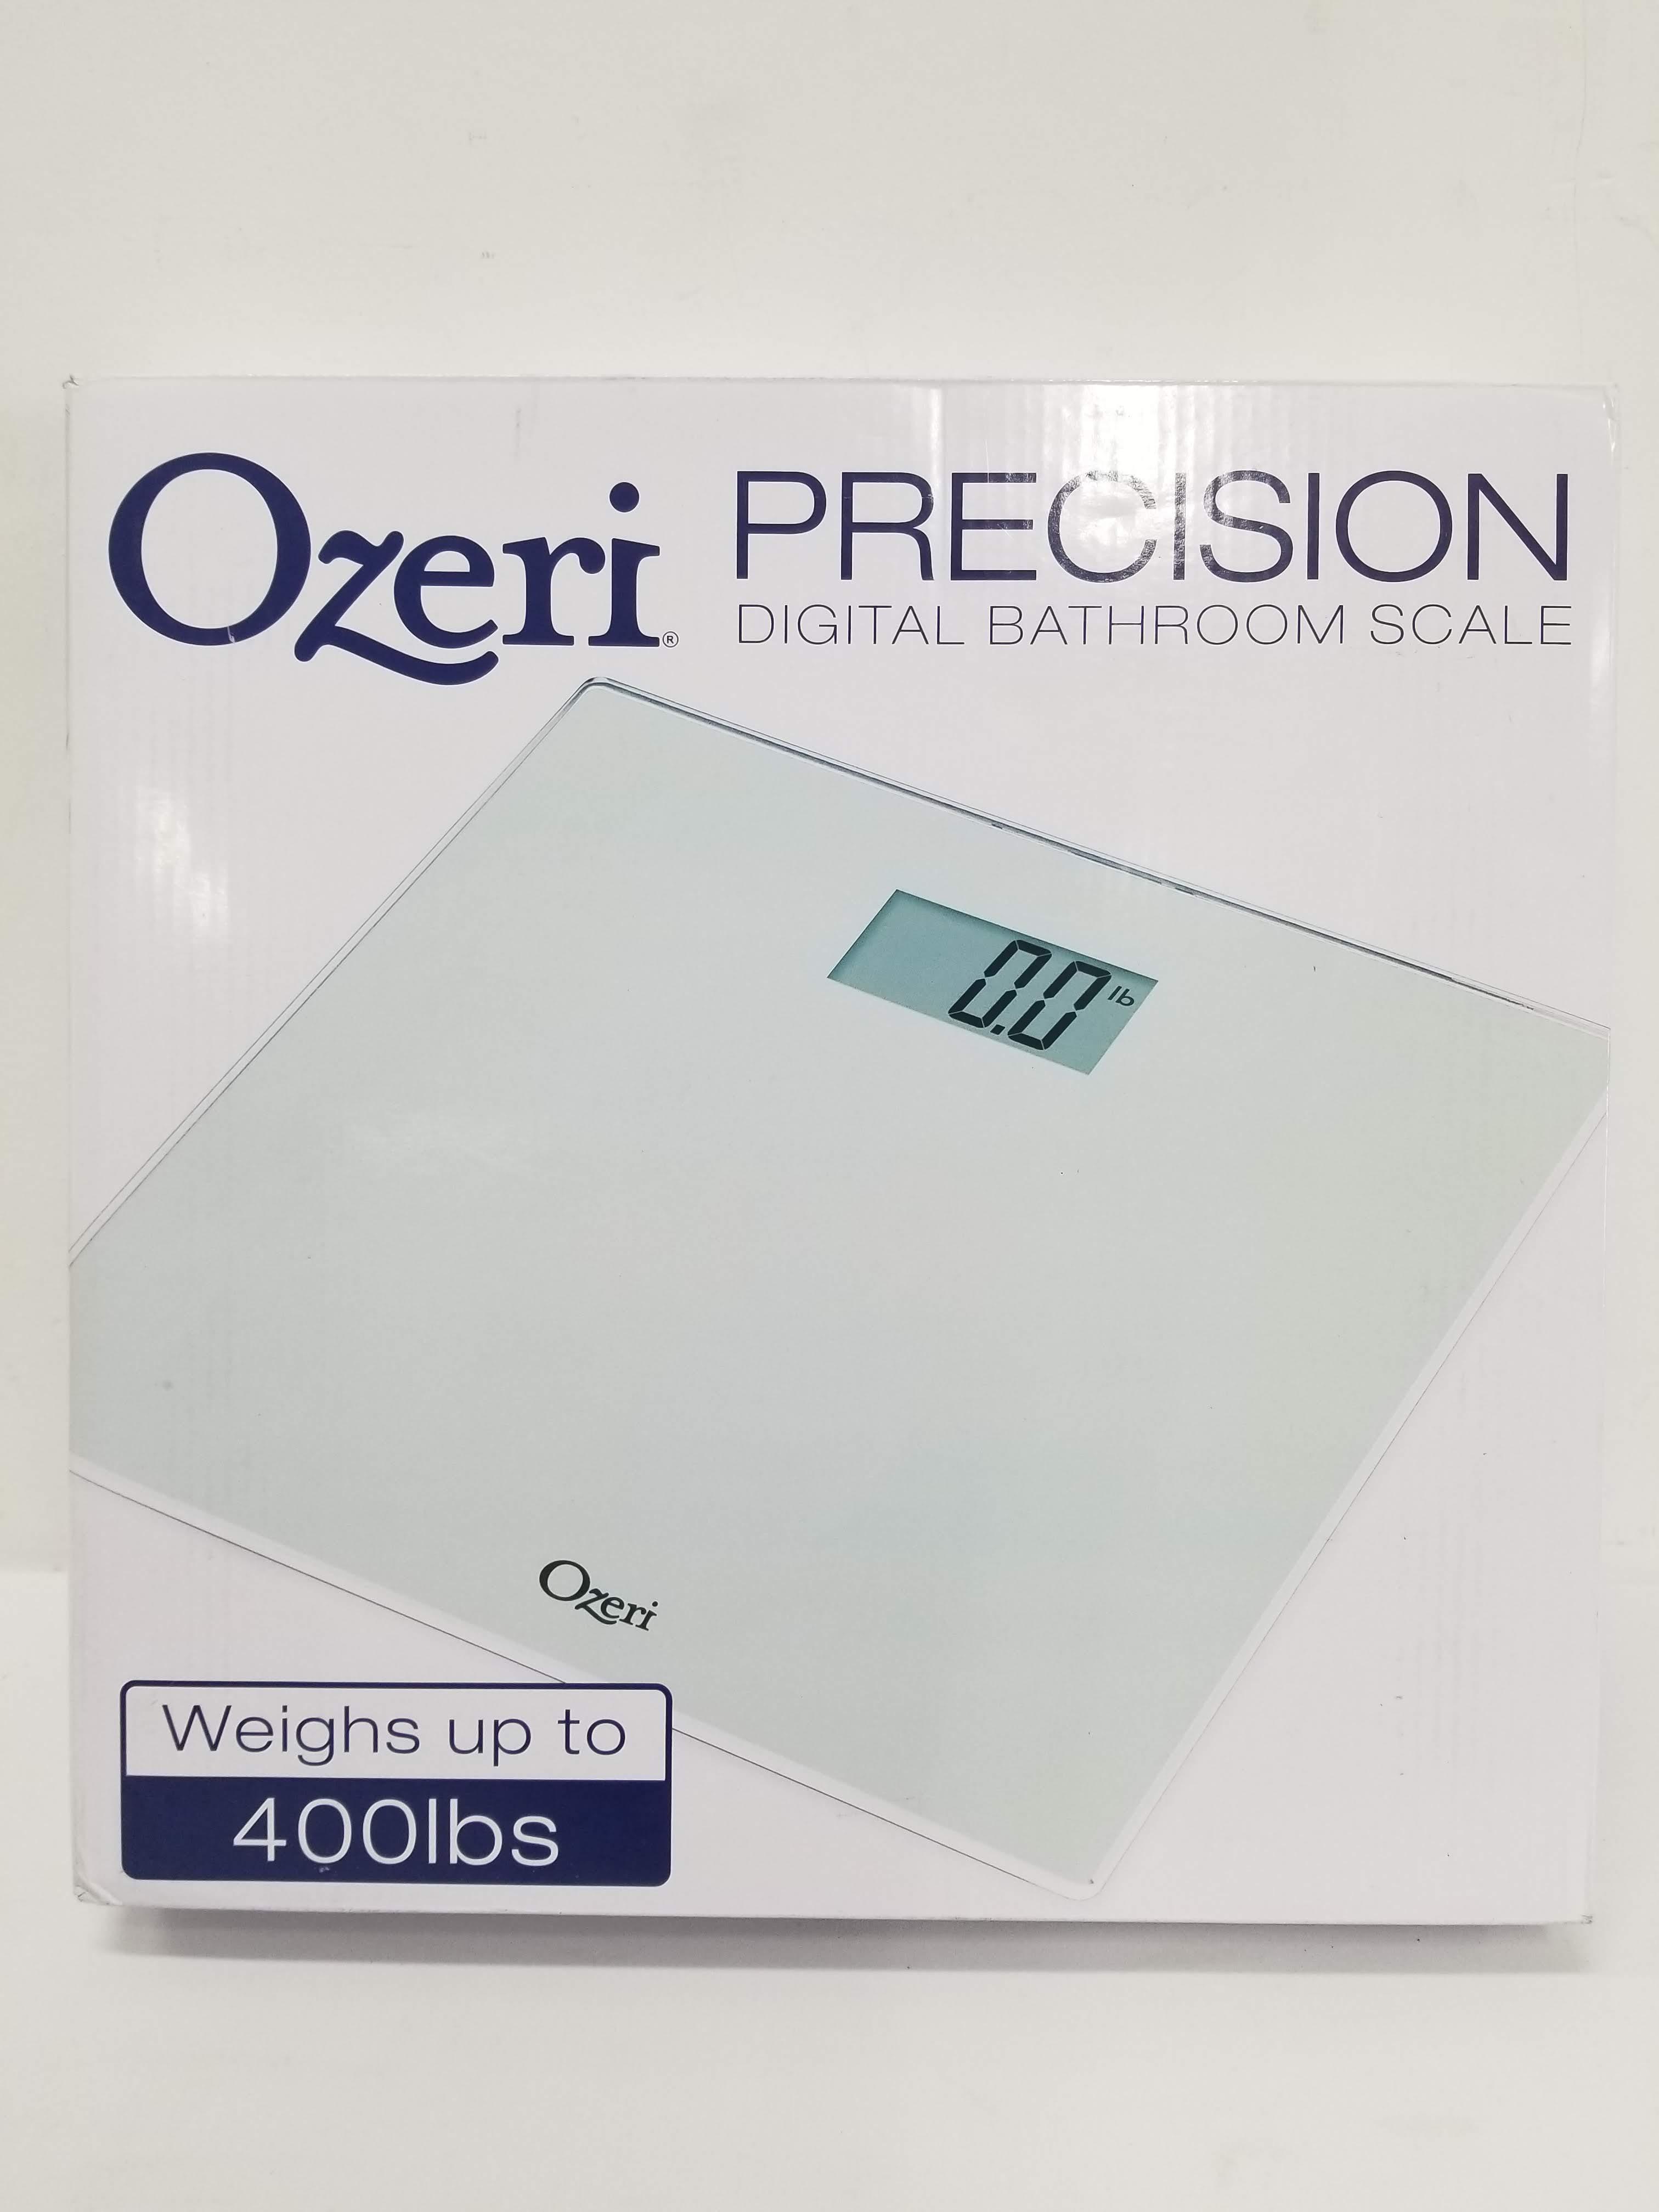 Ozeri Precision Digital Bathroom Scale - Weighs up to 400lbs - Open Box, New